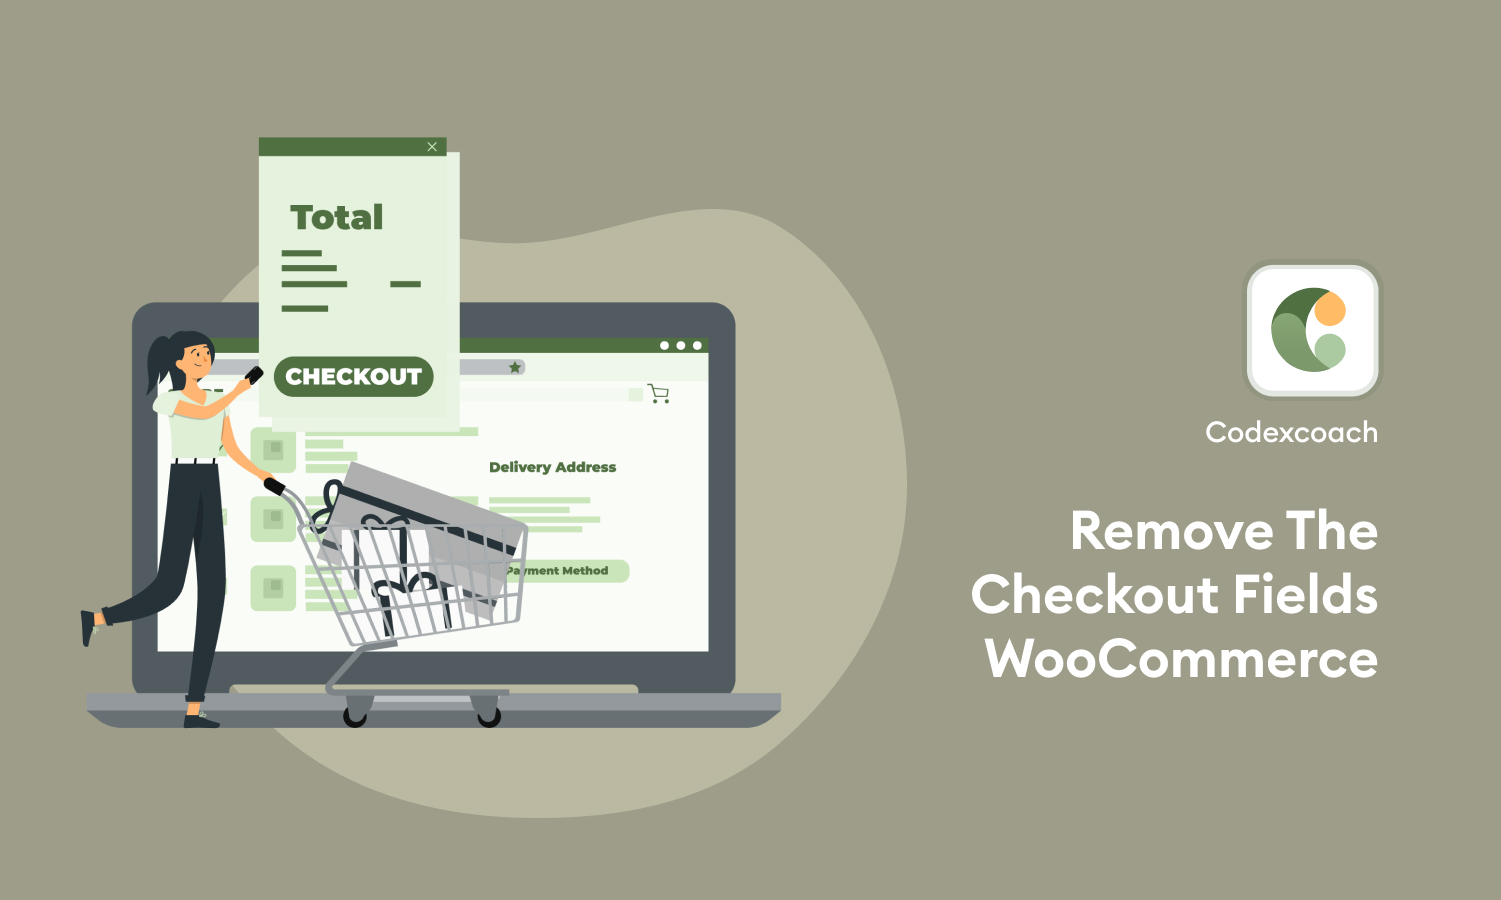 Remove The Checkout Fields WooCommerce